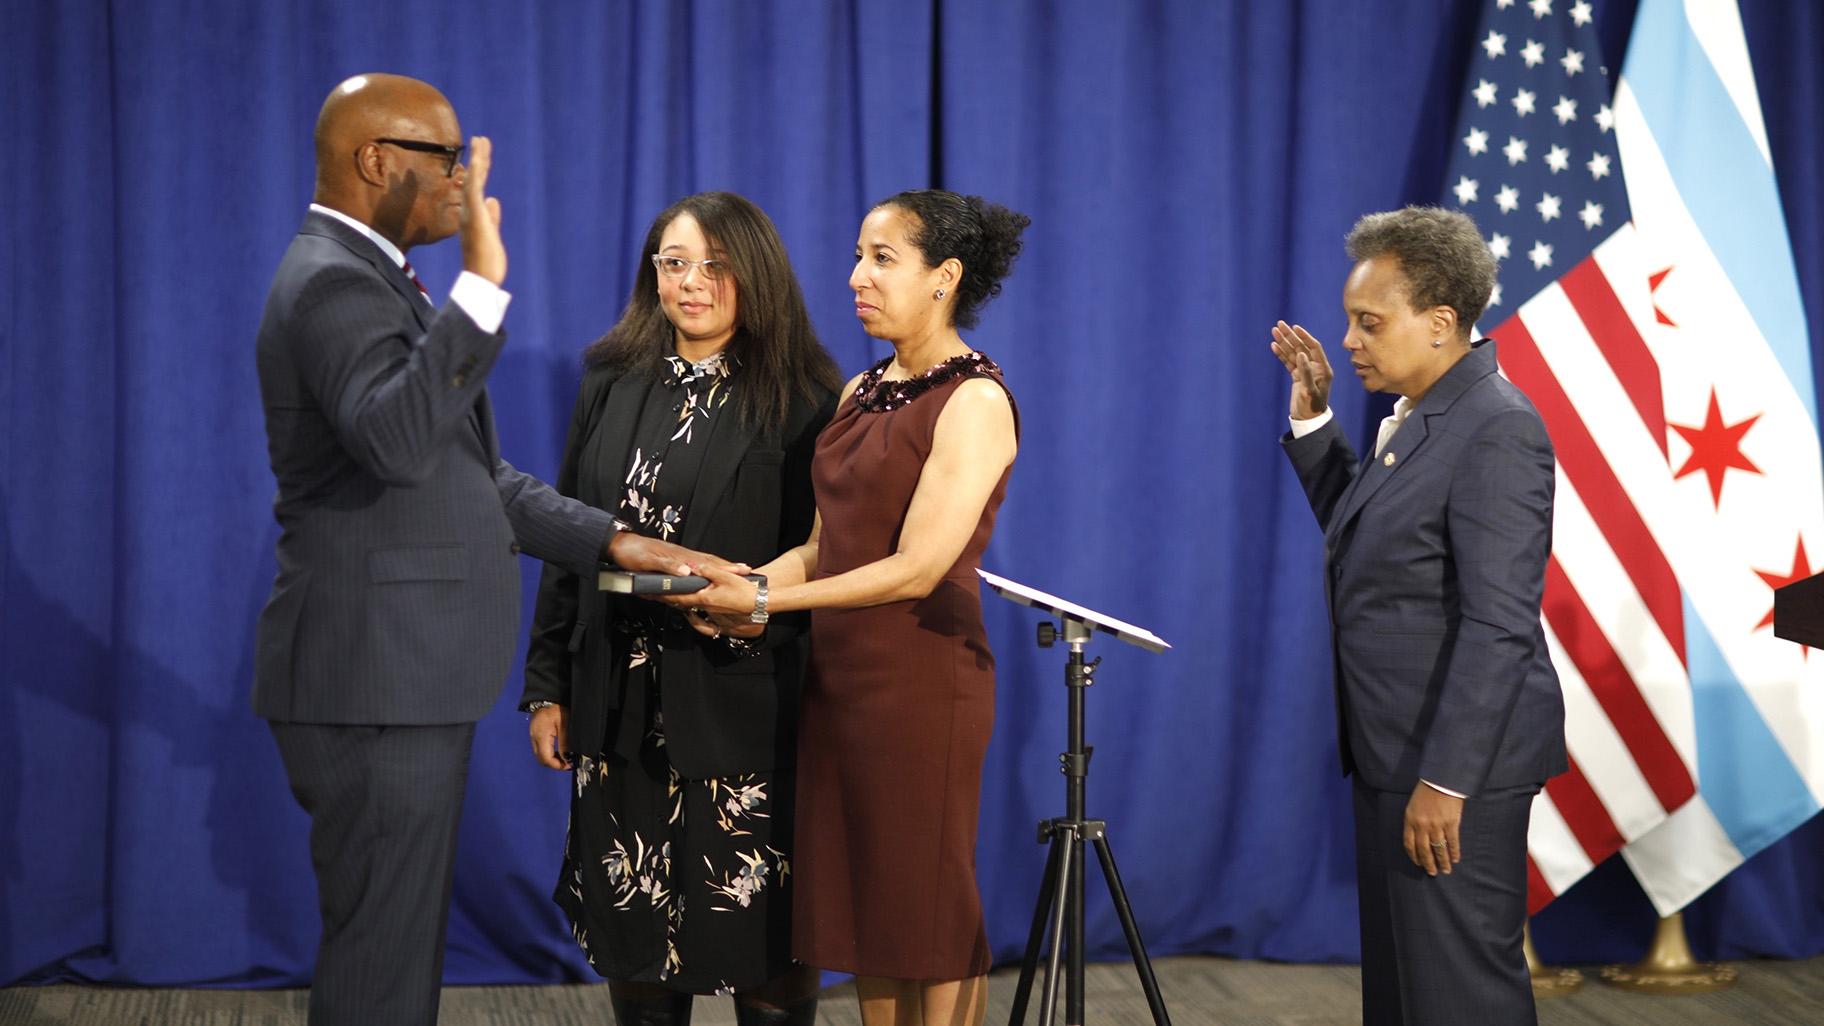 David Brown is sworn in as police superintendent by Chicago Mayor Lori Lightfoot after unanimous approval by the Chicago City Council on Wednesday, April 22, 2020. Brown’s wife and daughter are also pictured. (@Chicago_Police / Twitter photo)